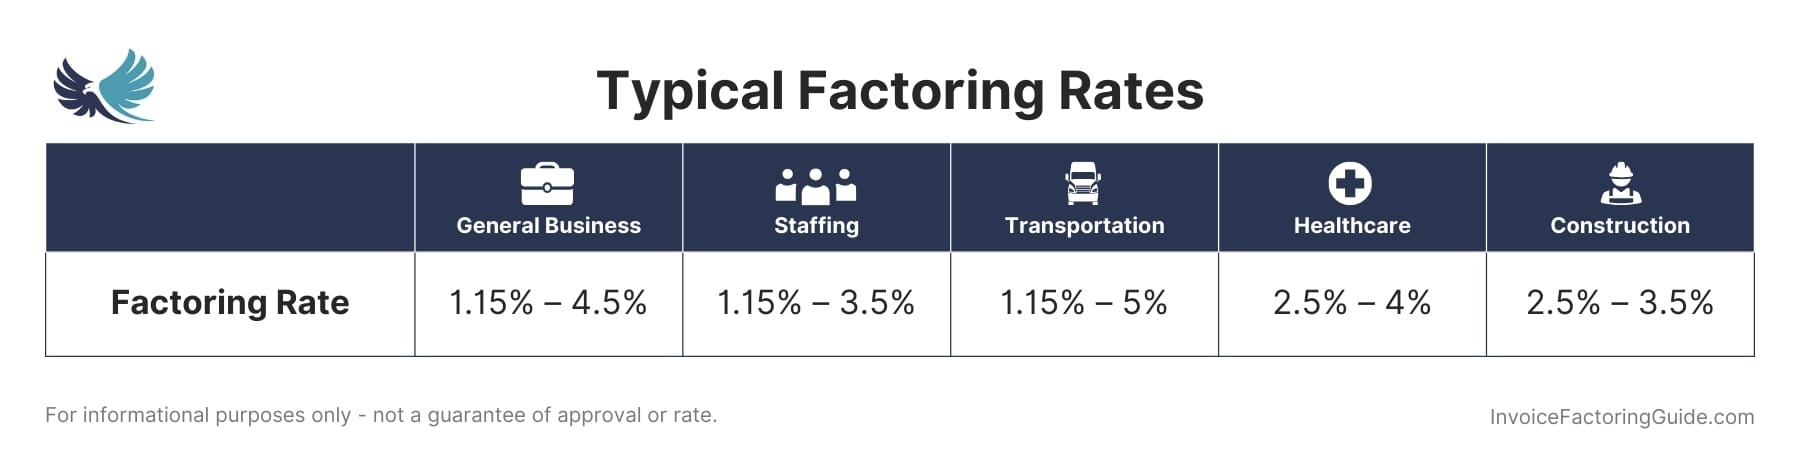 Typical Factoring Rates